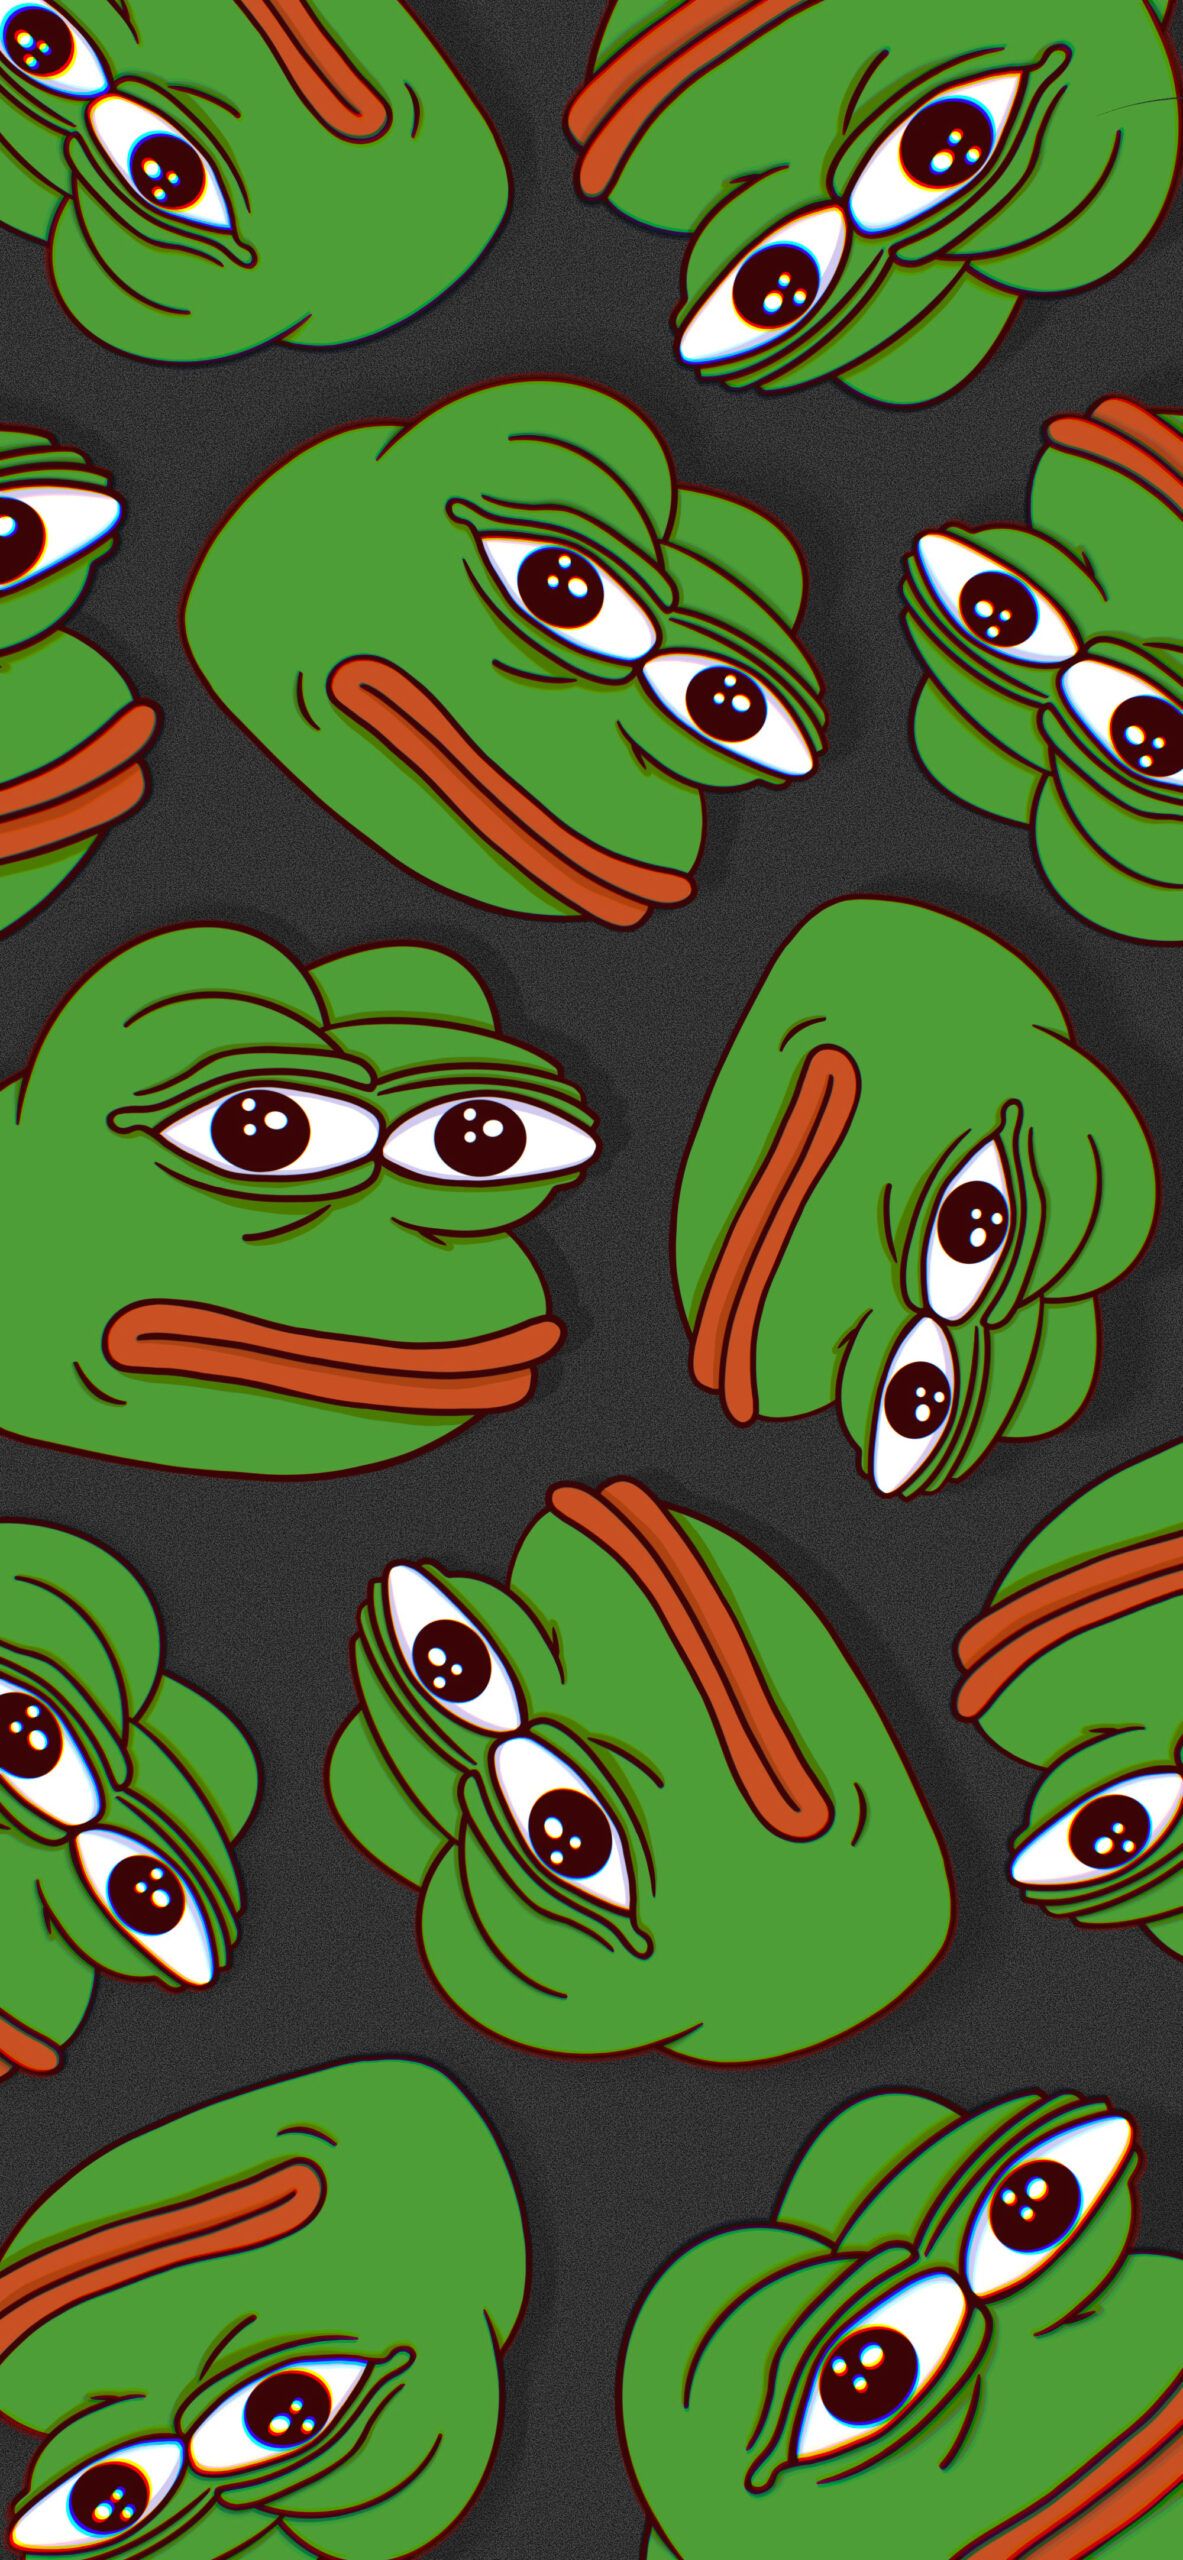 Pepe the frog wallpaper - Kermit the Frog